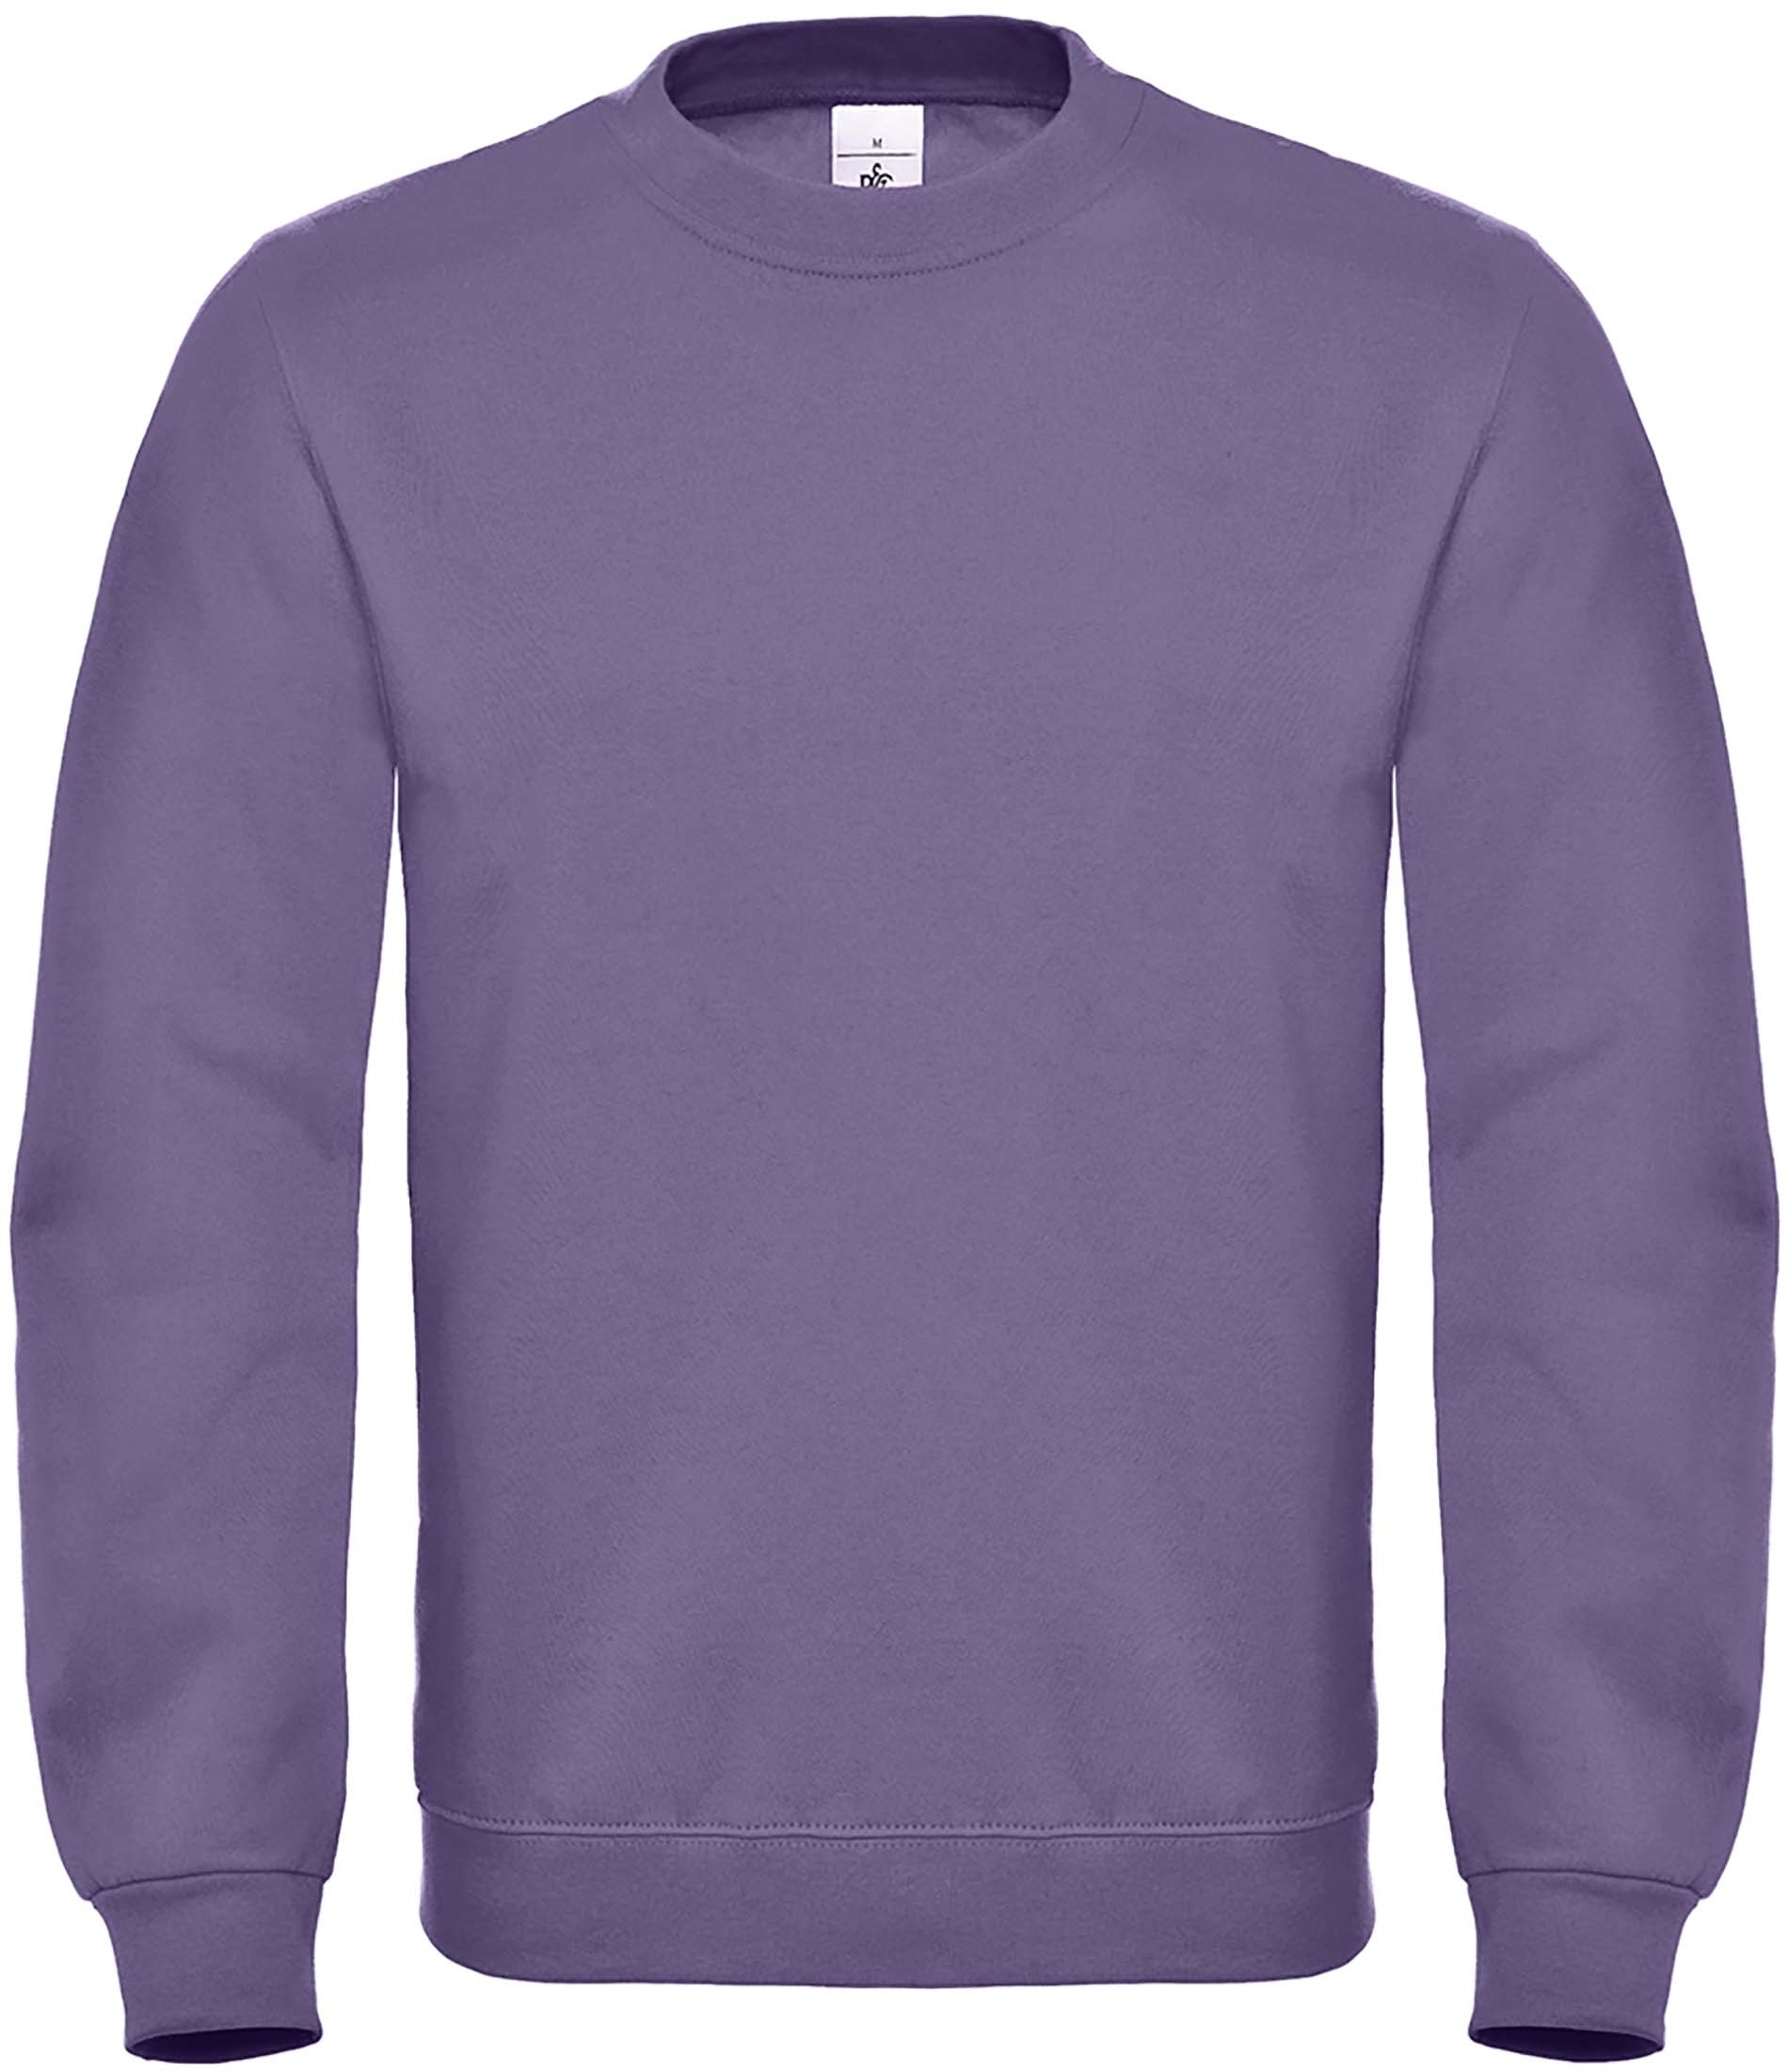 SWEAT-SHIRT COL ROND ID.002 Millenial Lilac Violet